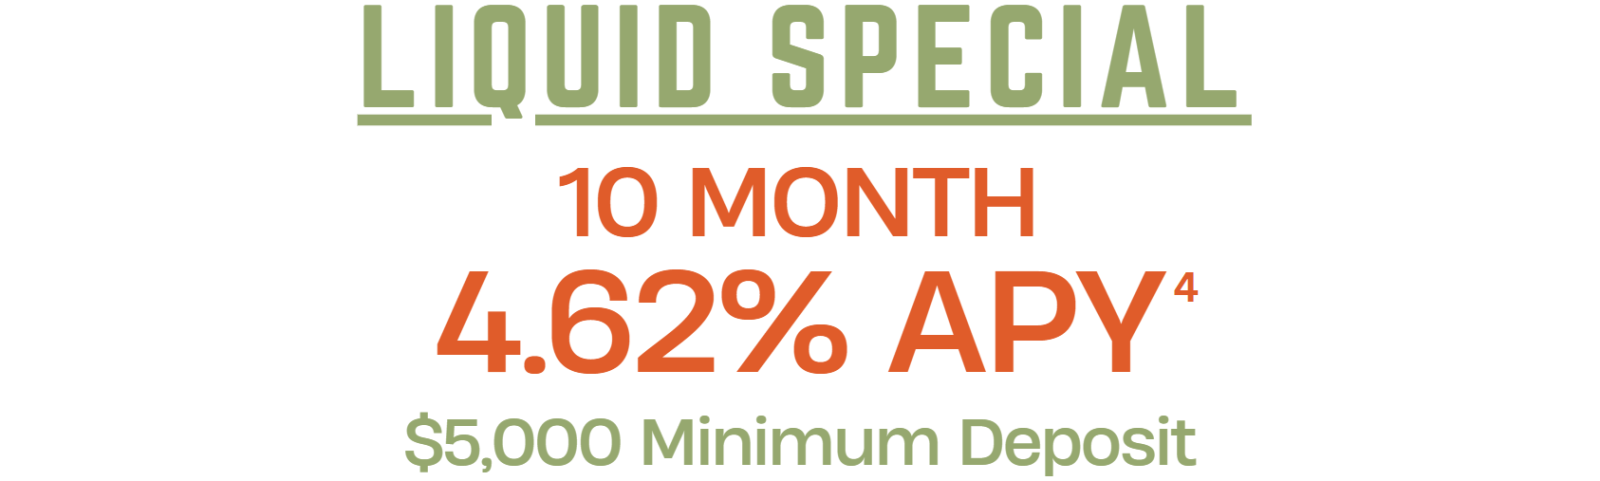 10 mo liquid special | 4.62% APY^4 | $5,000 min balance to open